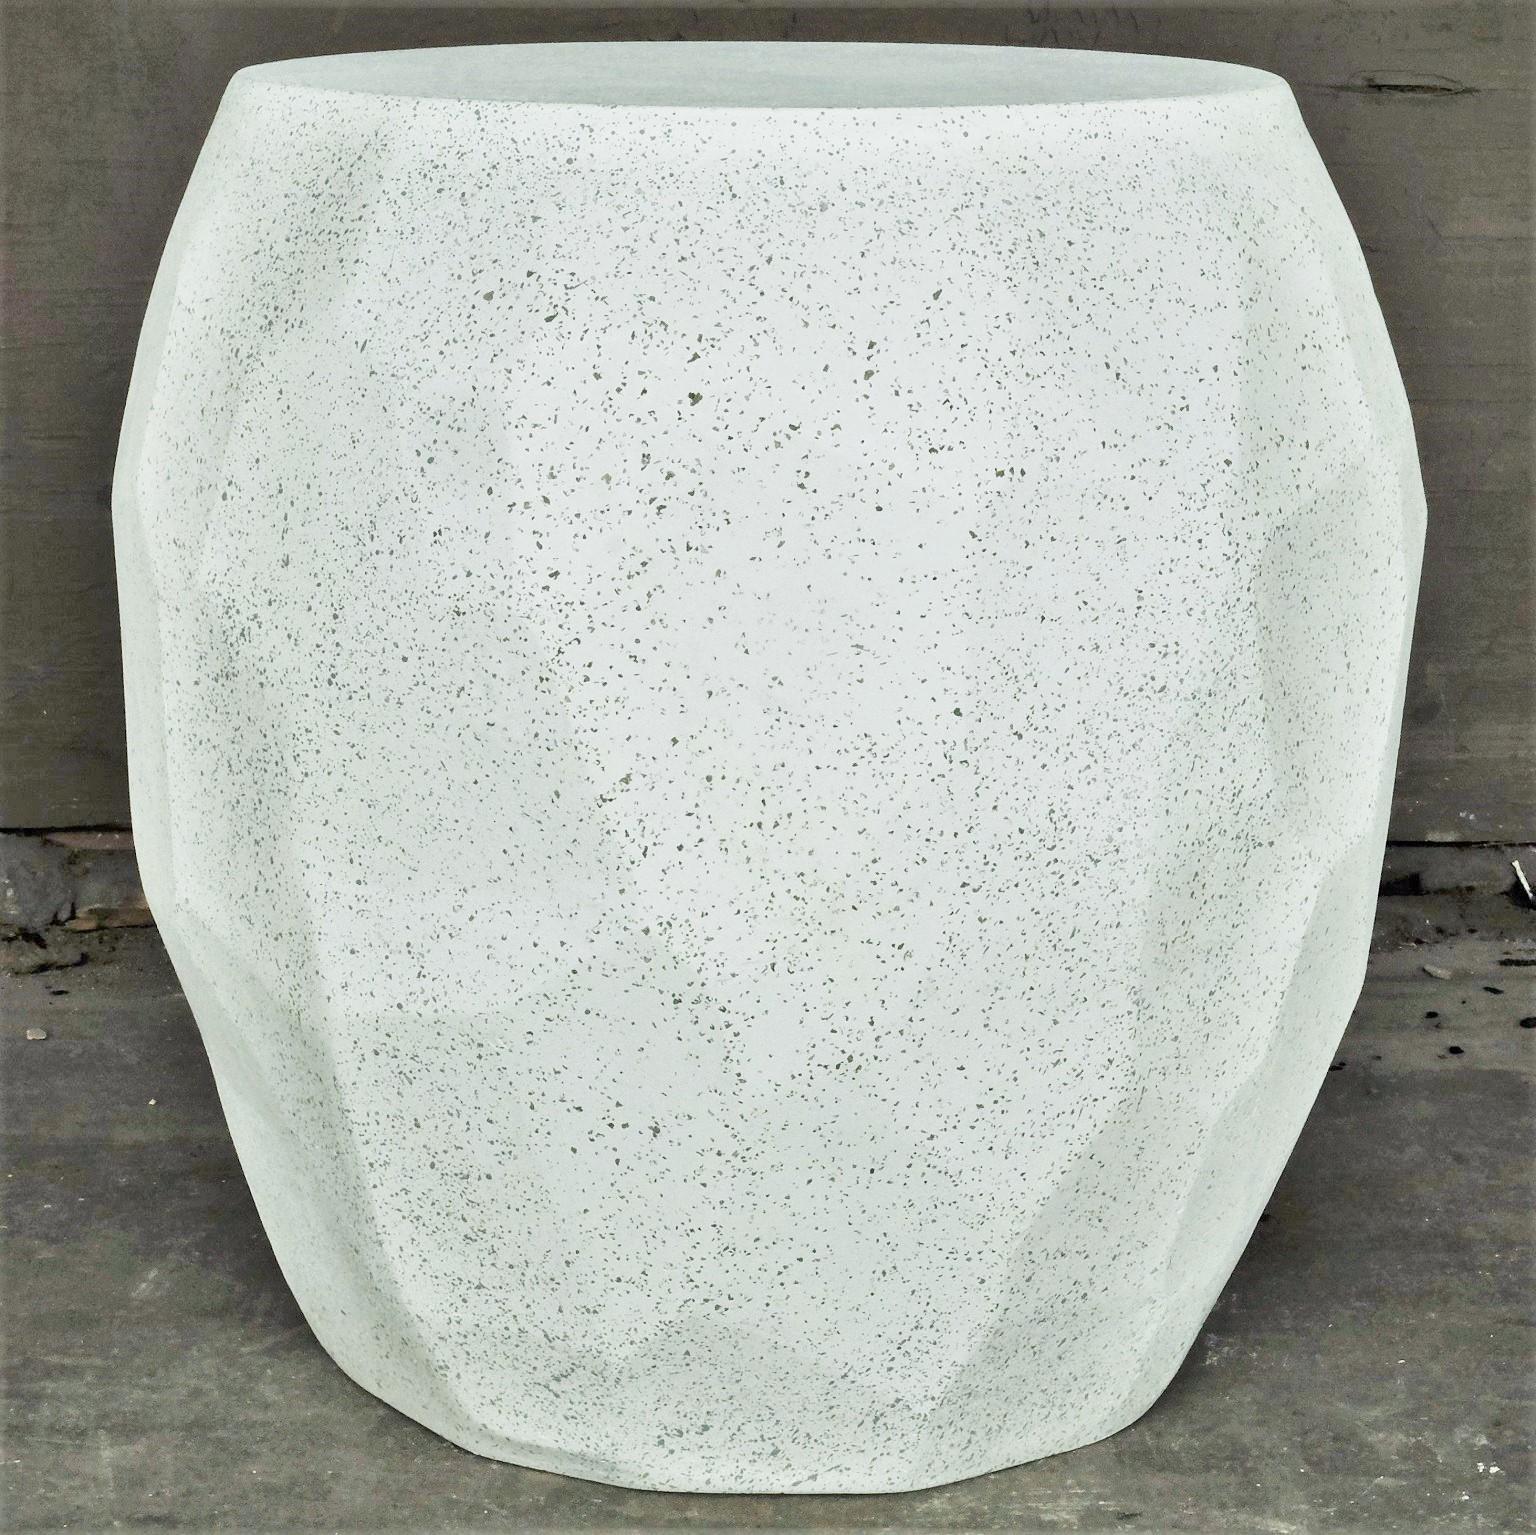 Prehistory manifested in the contemporary era. Its surface reminiscent of lithic reduction, the Facet calls back to an era of simple stone forms and tools.

Dimensions: Diameter 20 in. (50.8 cm), height 21 in. (53.3 cm), weight 25 lbs. (11.3 kg)
No